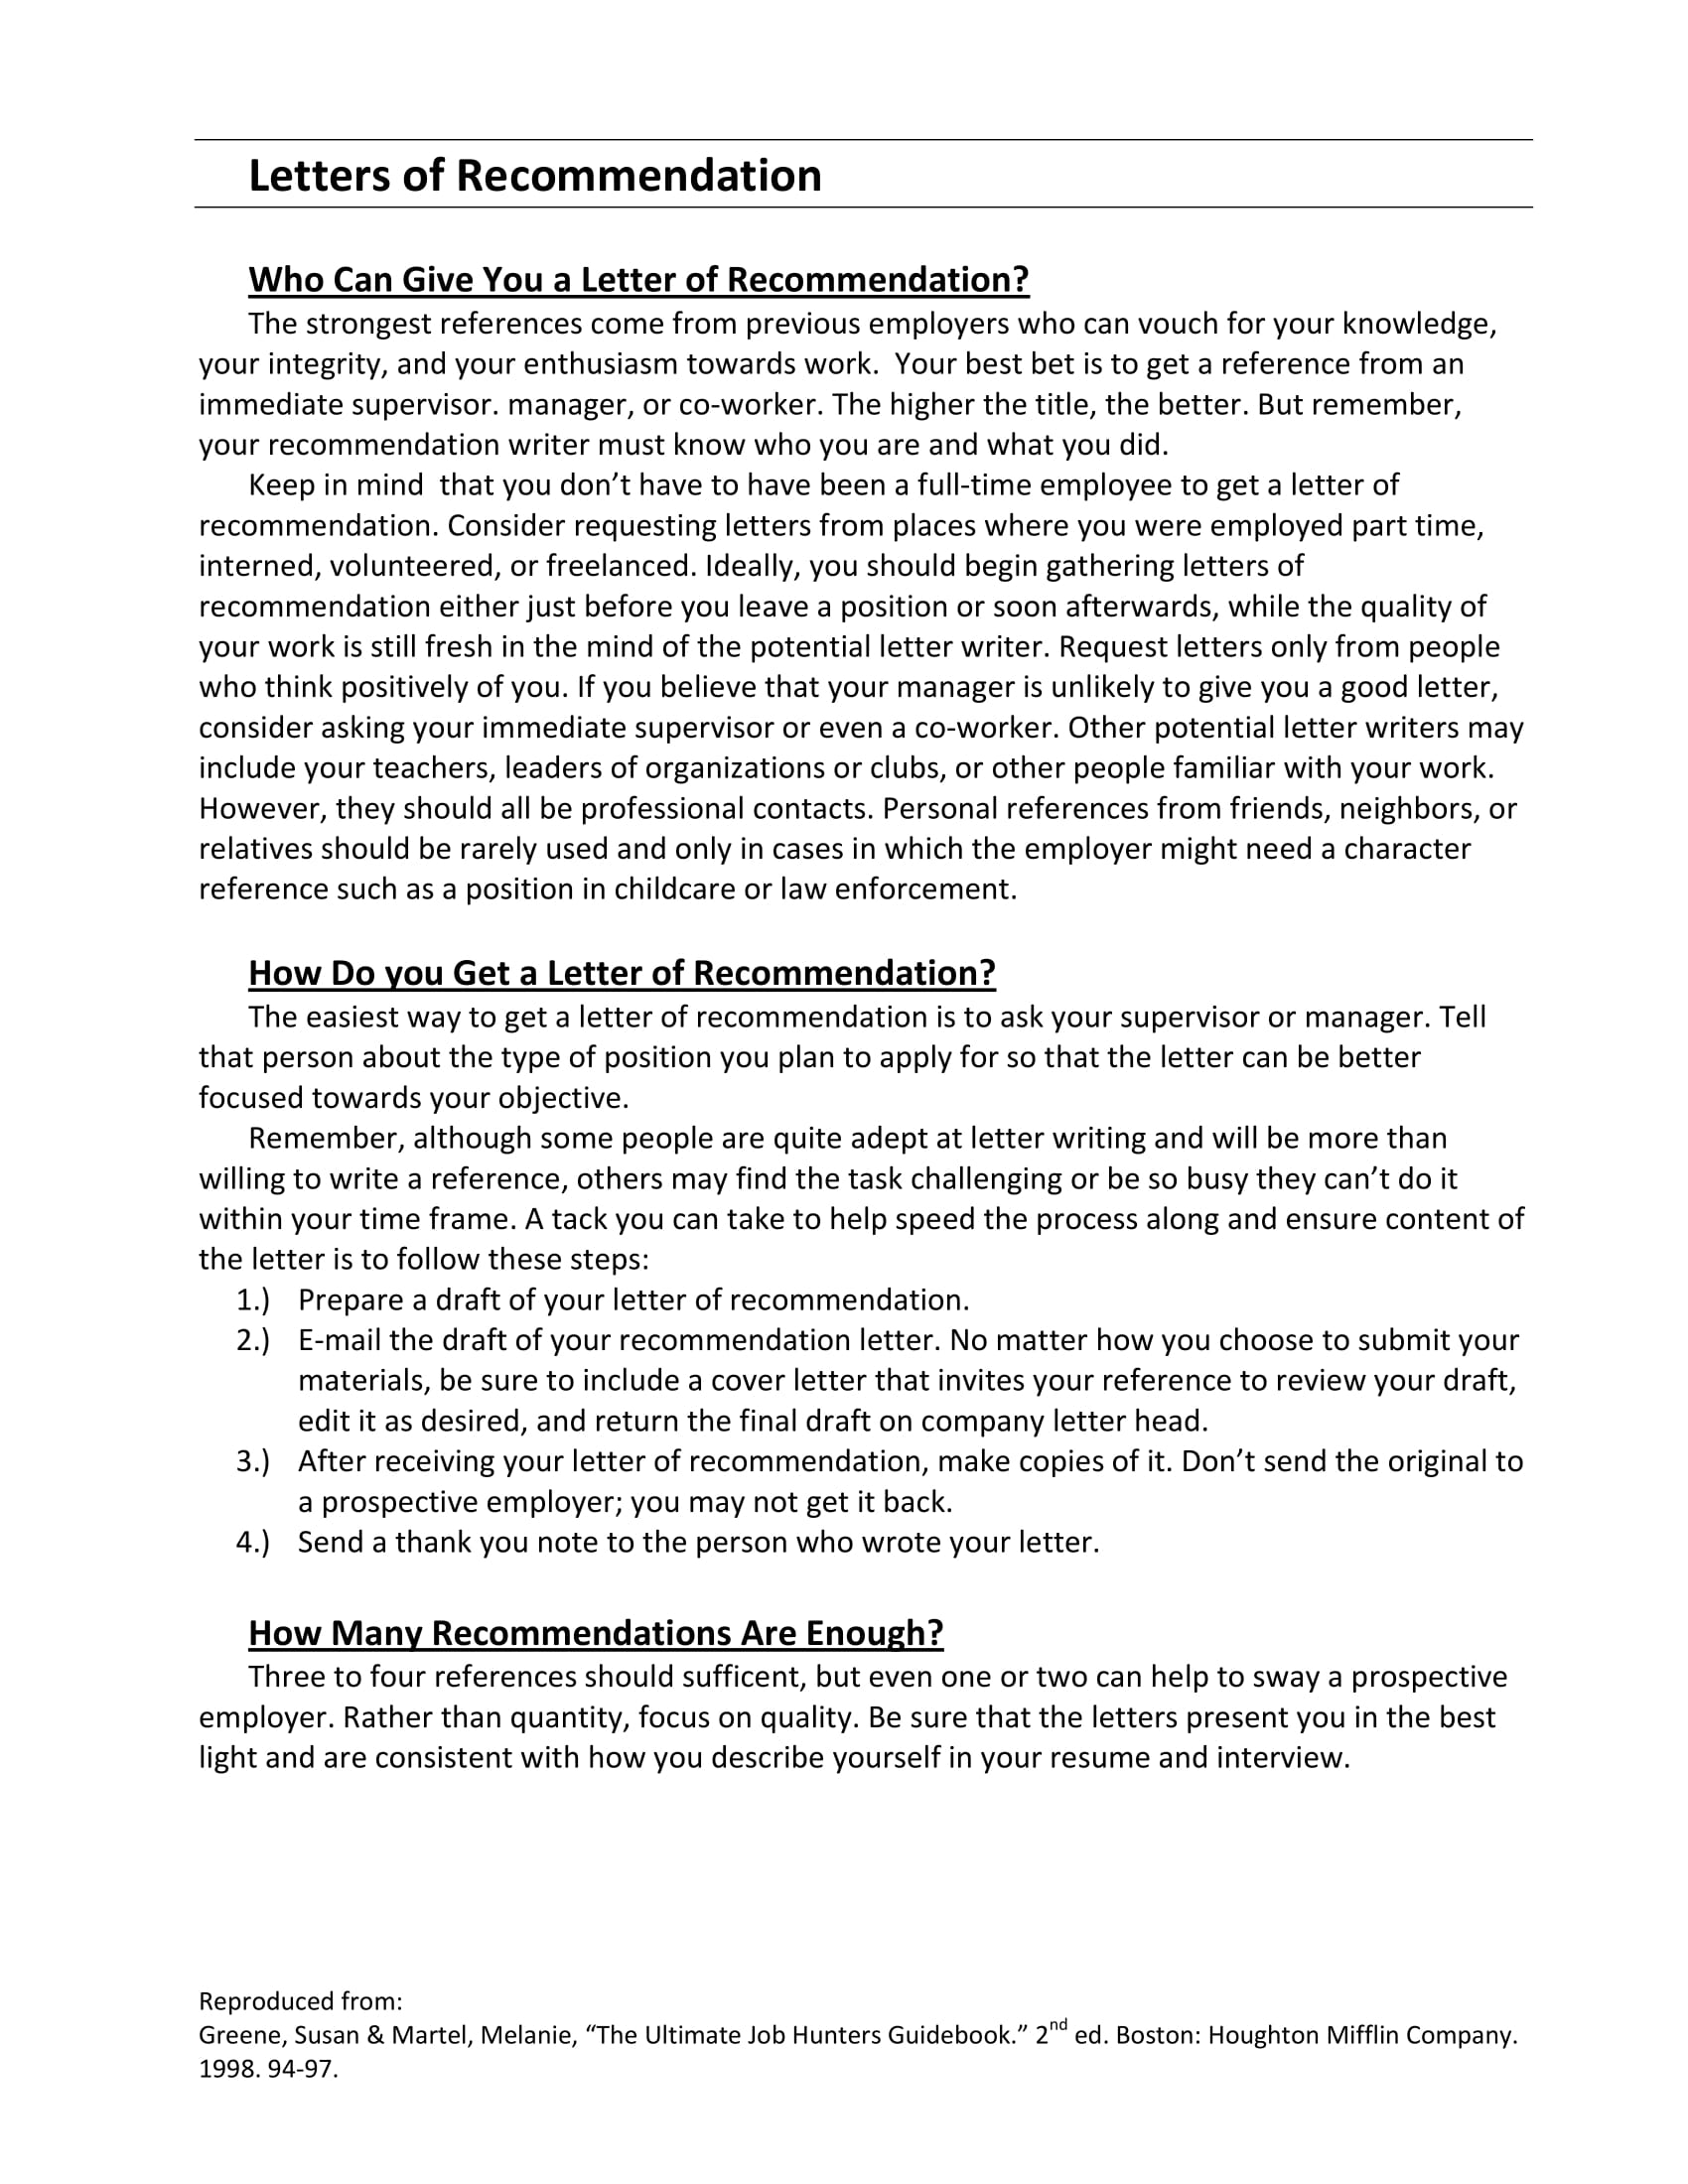 reference or recommendation letter from a previous employer writing guides and example 1